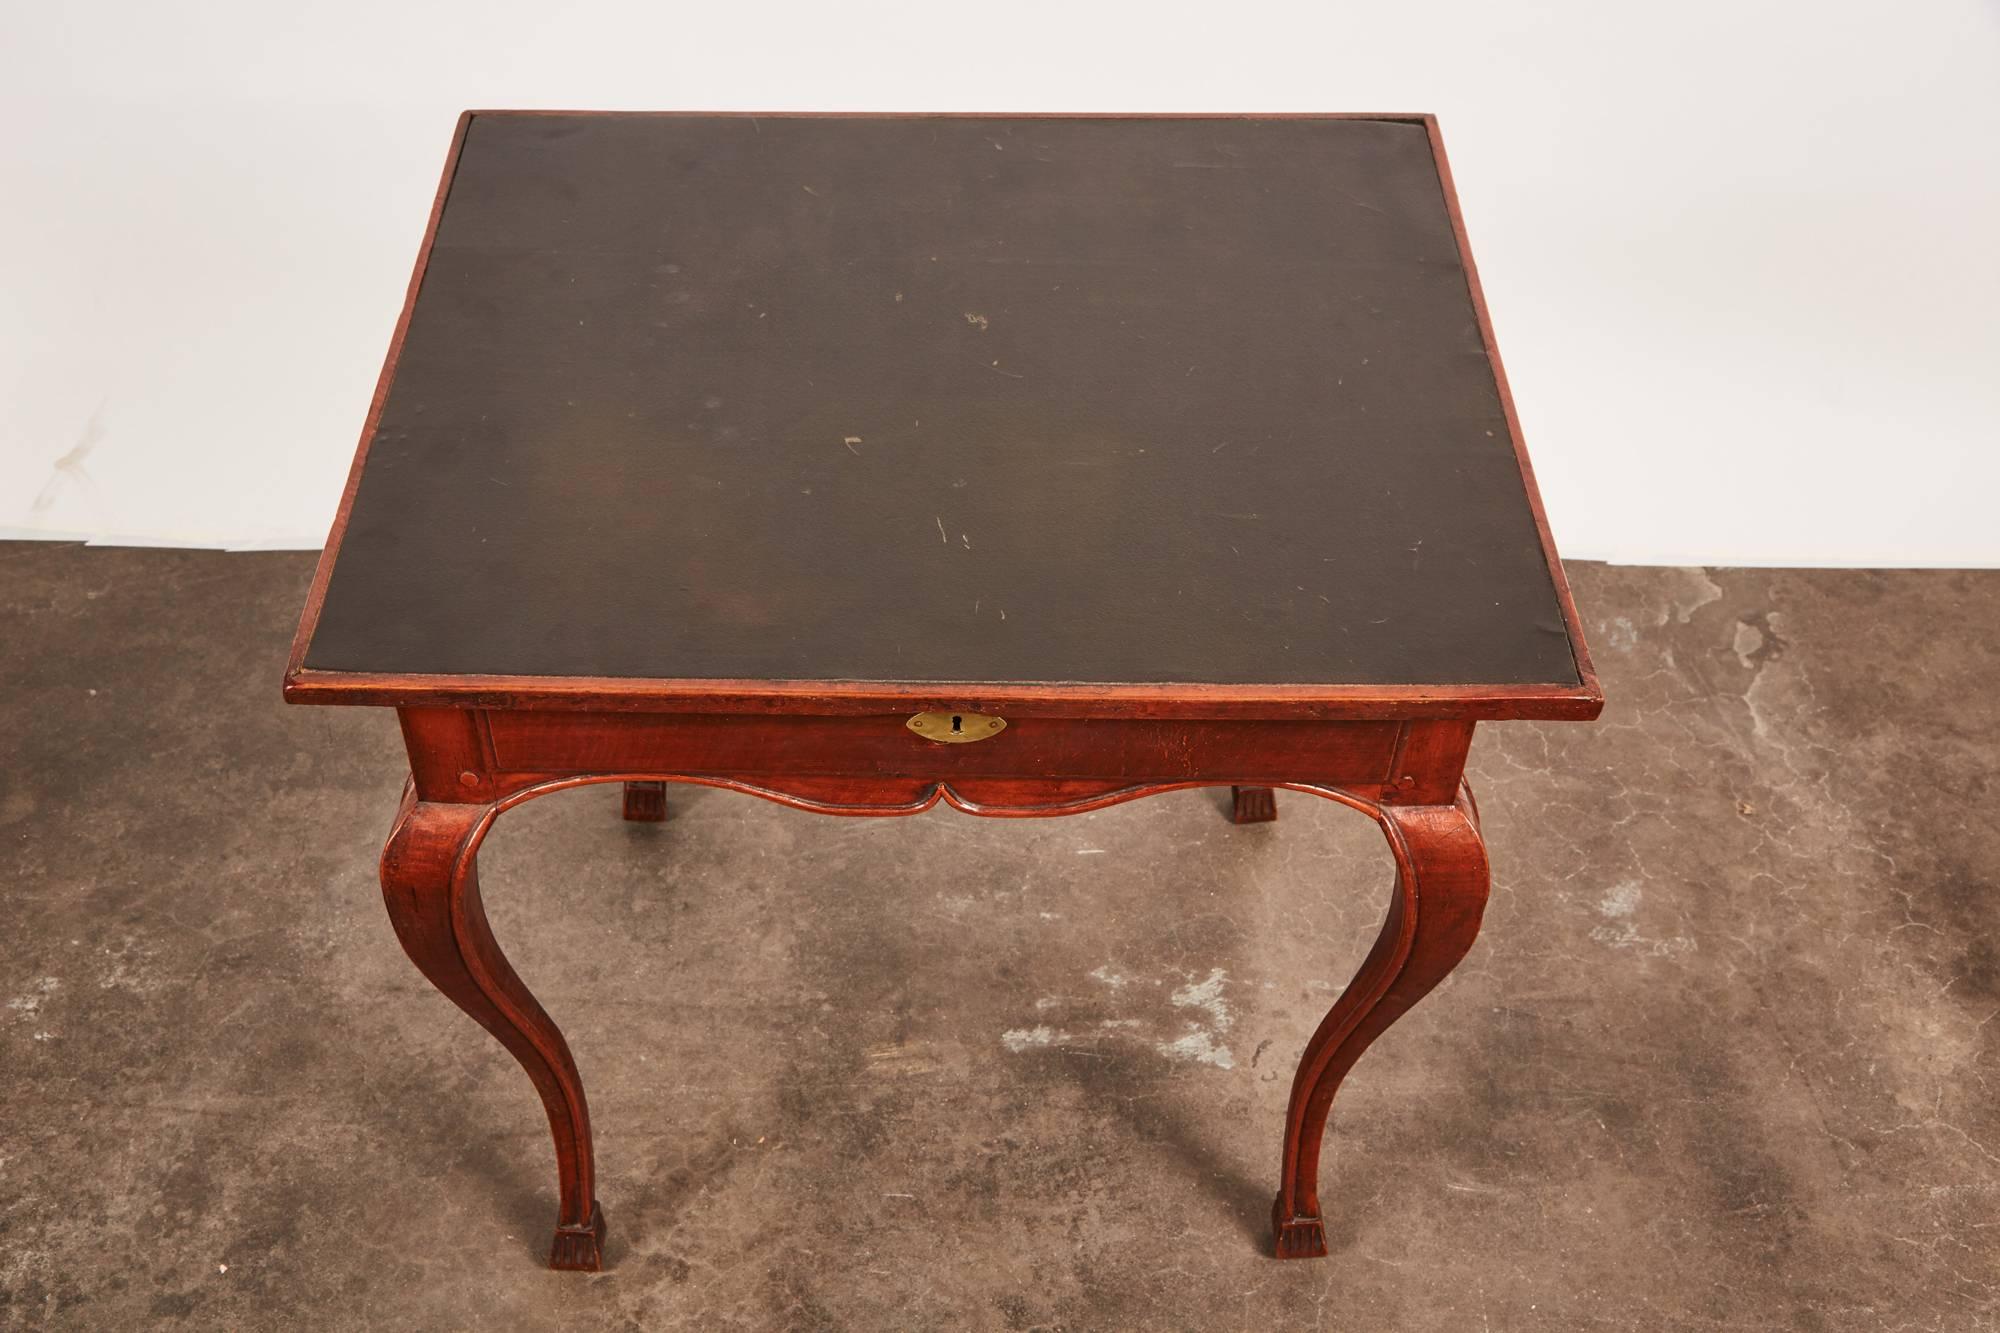 A late 18th century French beech Louis XV game table consisting of faded red paint overall and a black leather top later applied. Its characteristics are a set of four simplistic cabriole legs, four high center pivots and exposed nailheads.